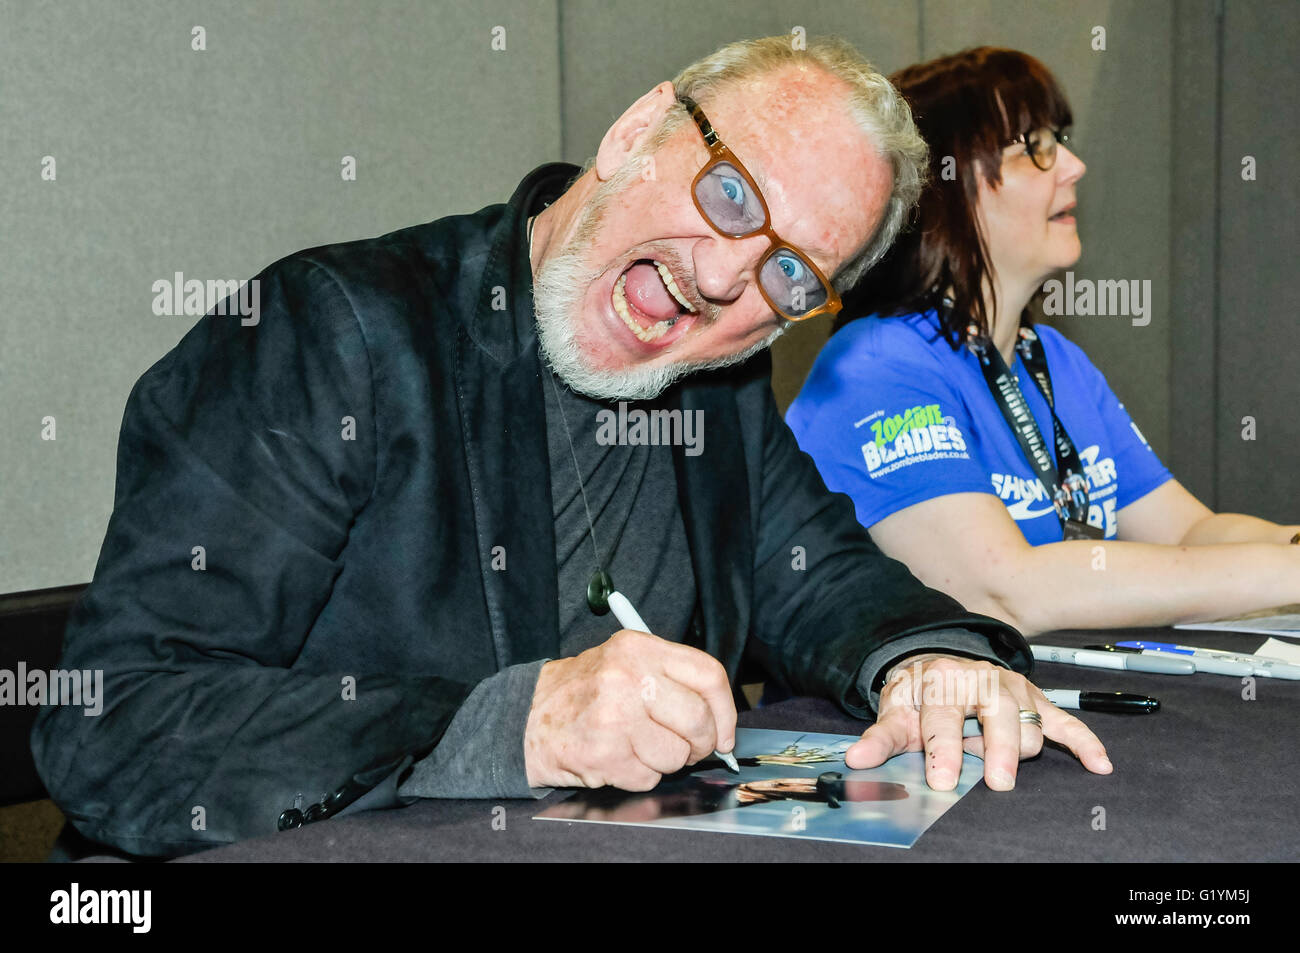 American actor Robert Englund, famous for playing Freddie Krueger in Nightmare On Elm street series of films signs autographs at Comicon Belfast, Northern Ireland, 14 May 2016 Stock Photo